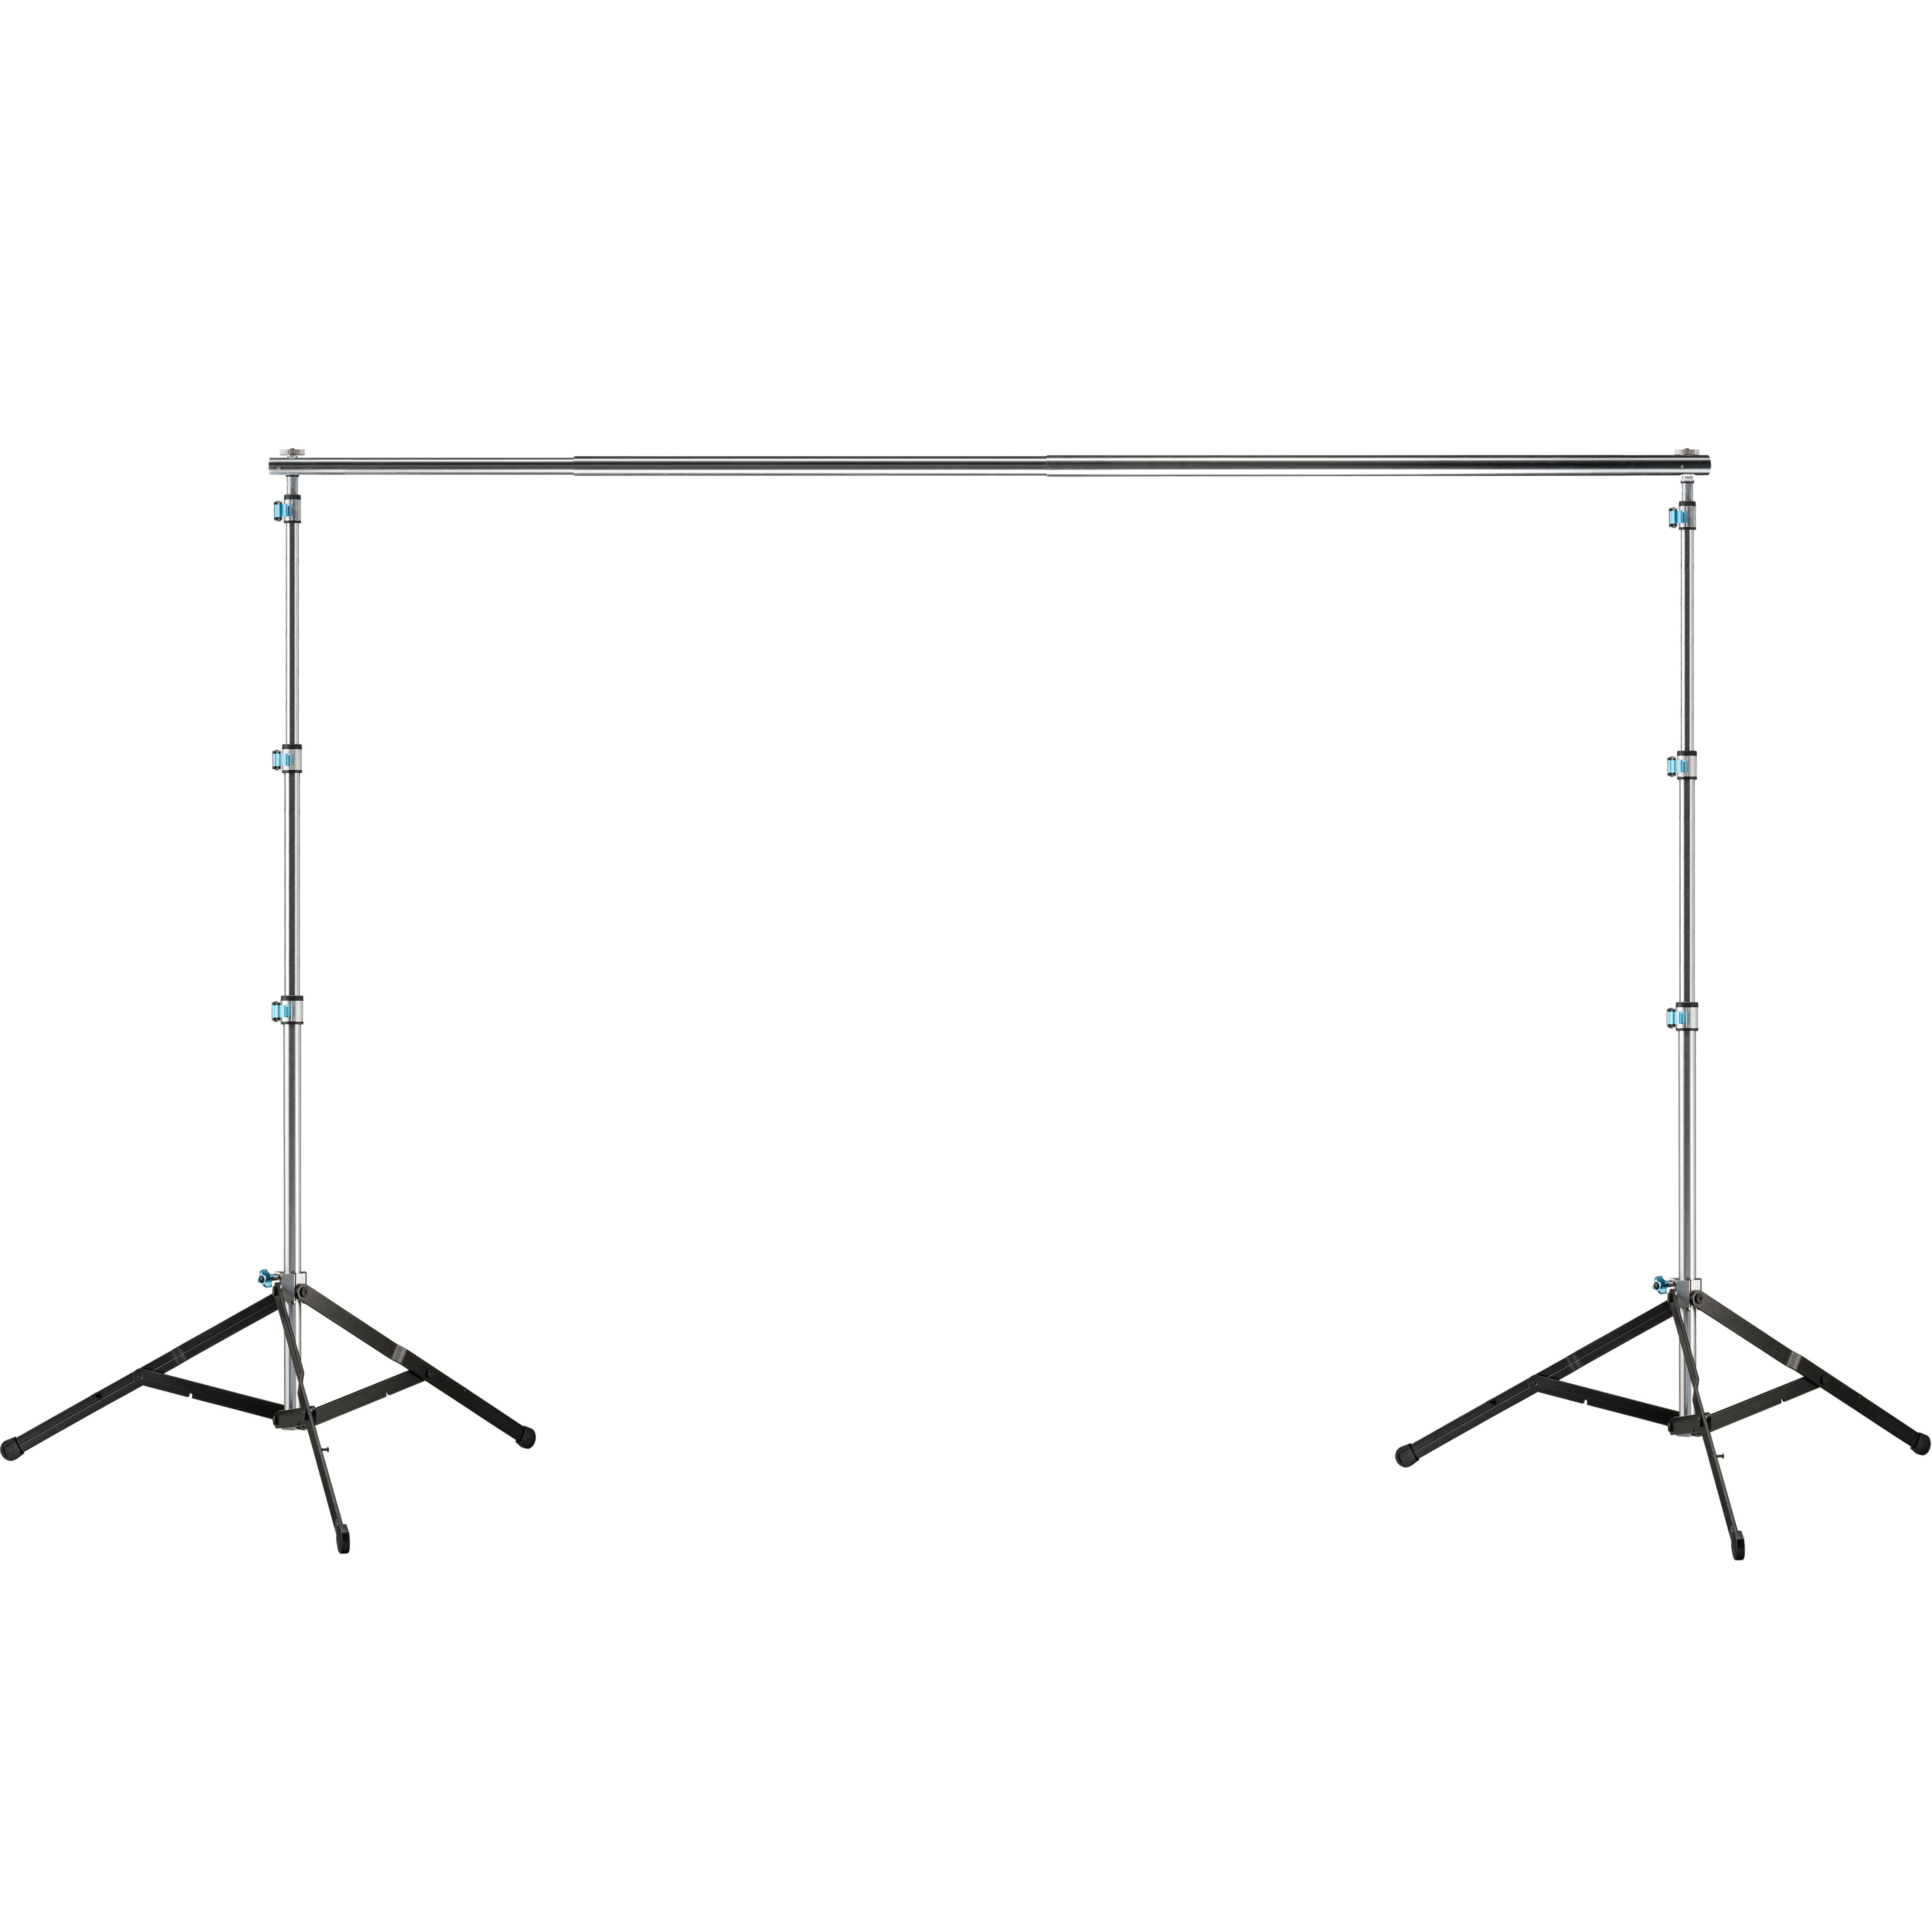 BRESSER BR-BS310 PRO Background Support 300 x 310 cm for heavy Studio Backgrounds